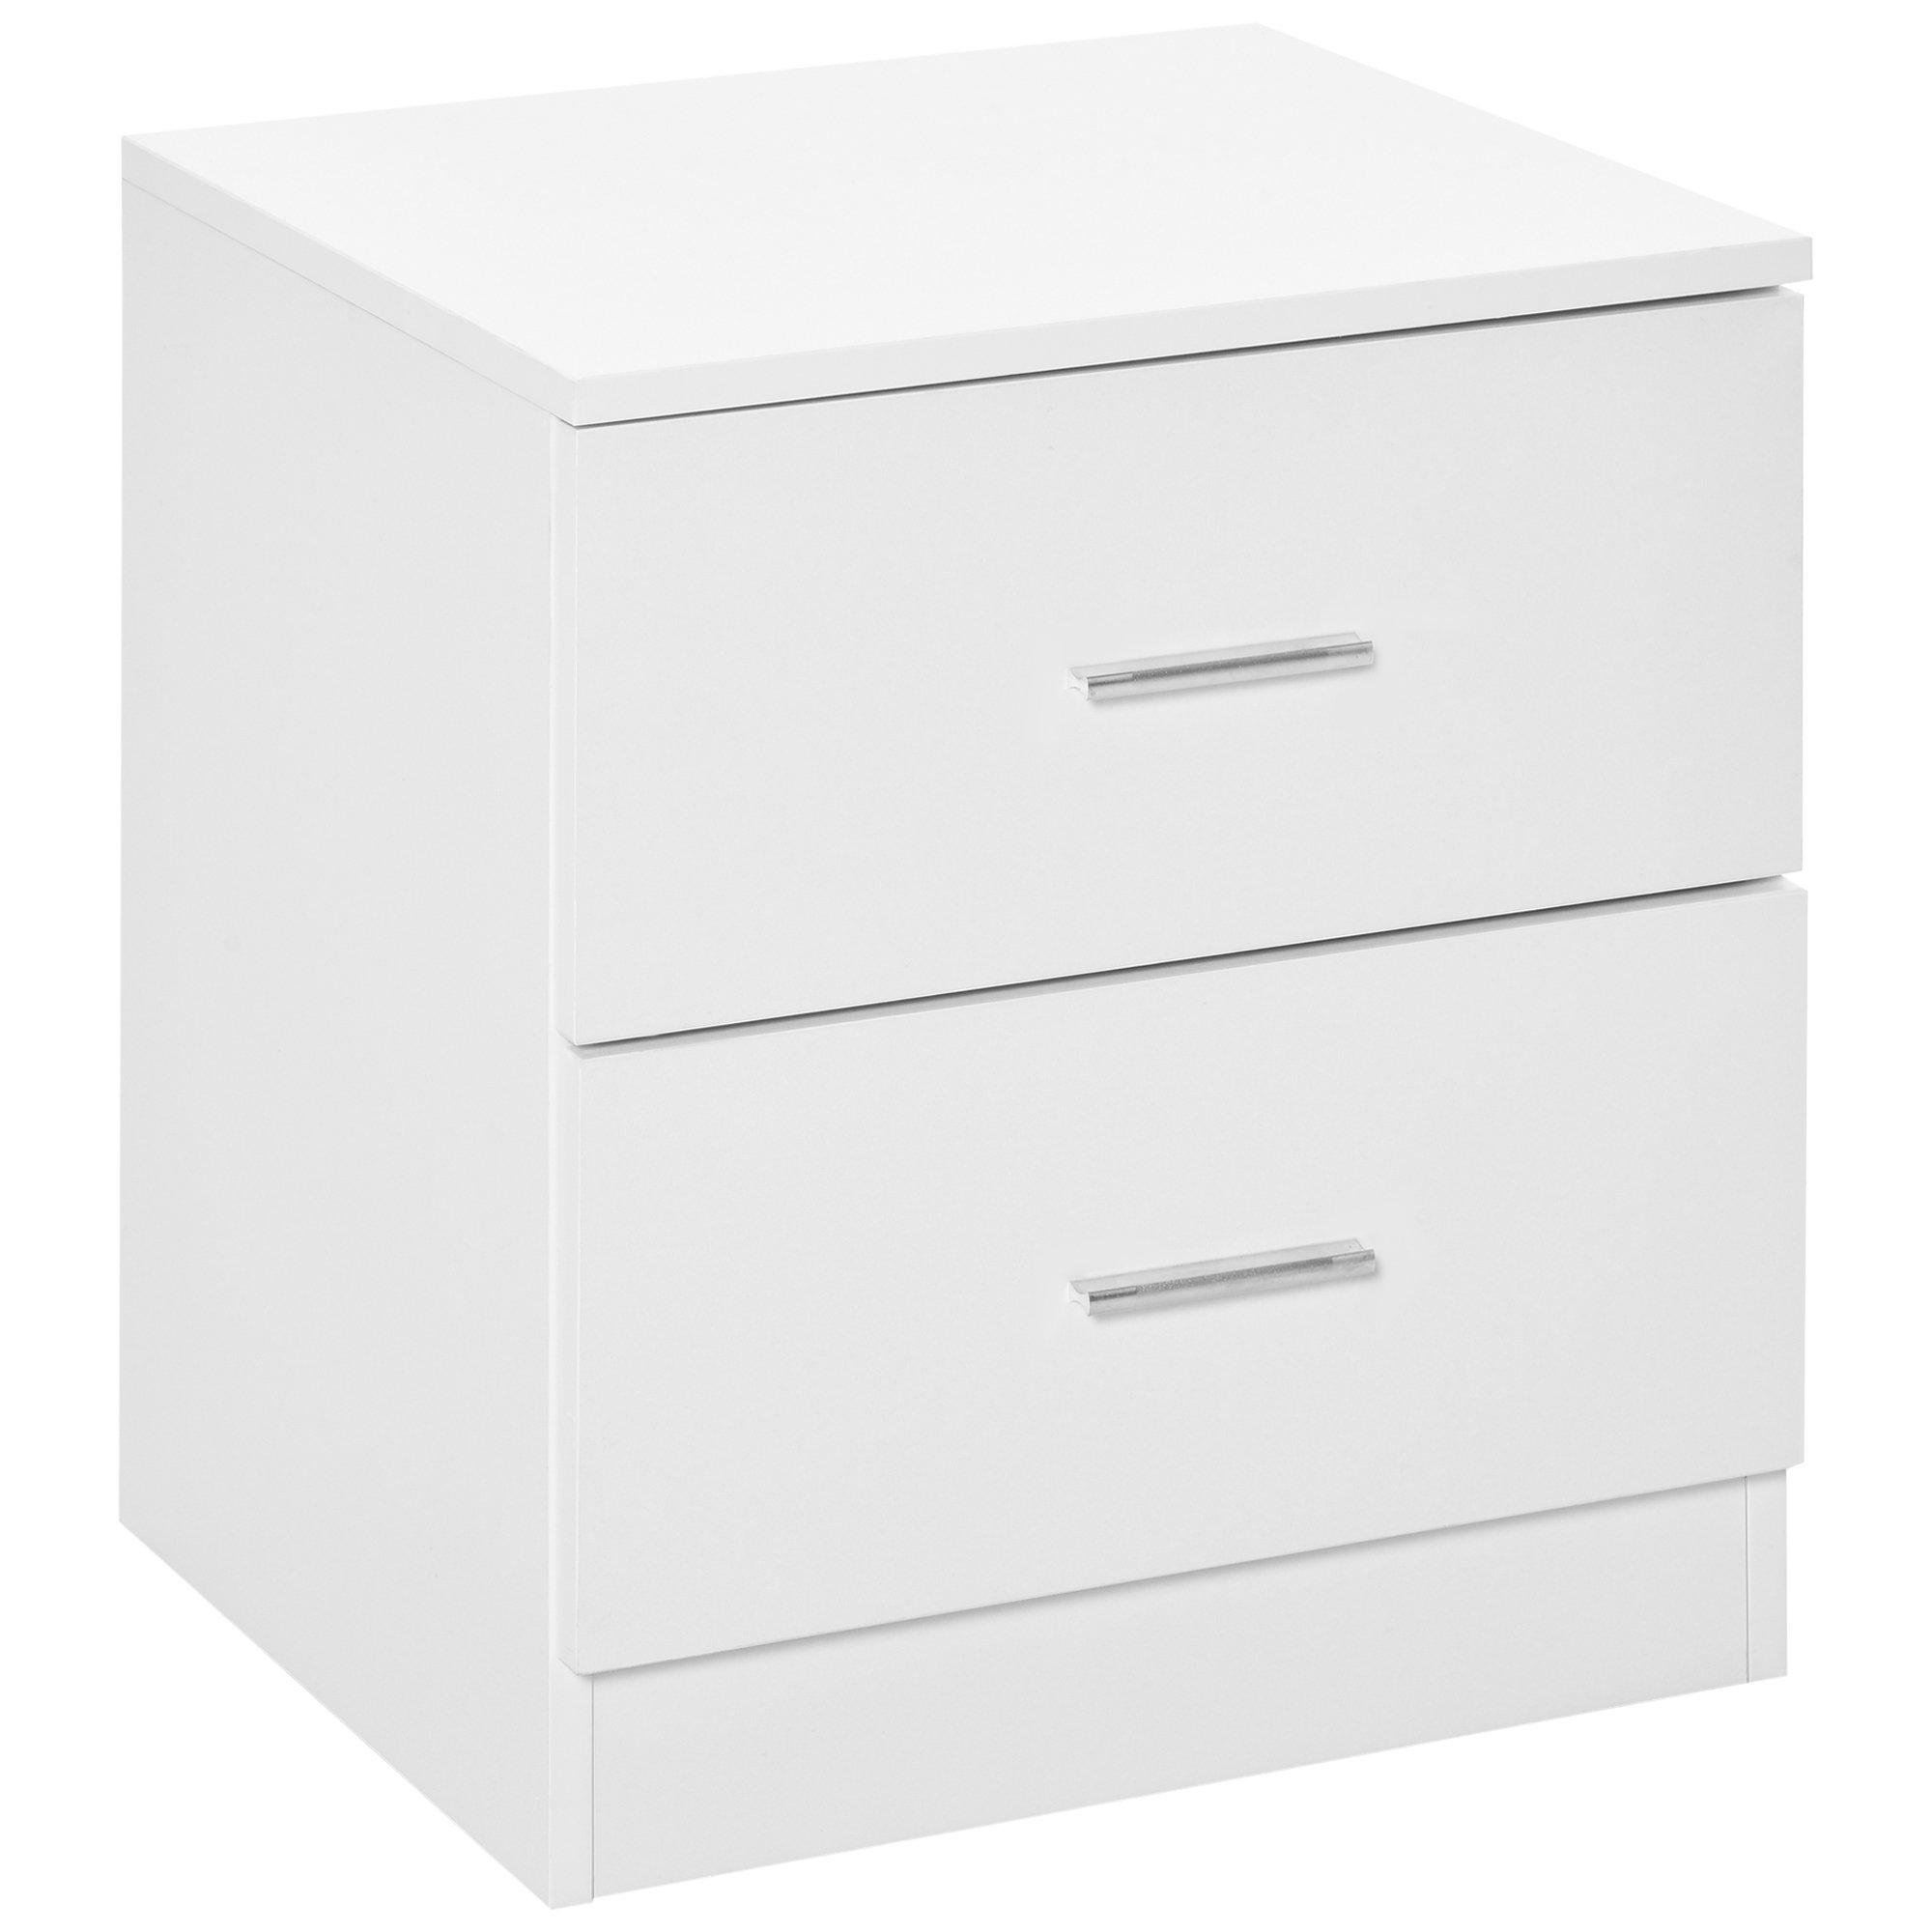 Bedside Table with 2 Drawers Nightstand Cabinet Drawers Storage